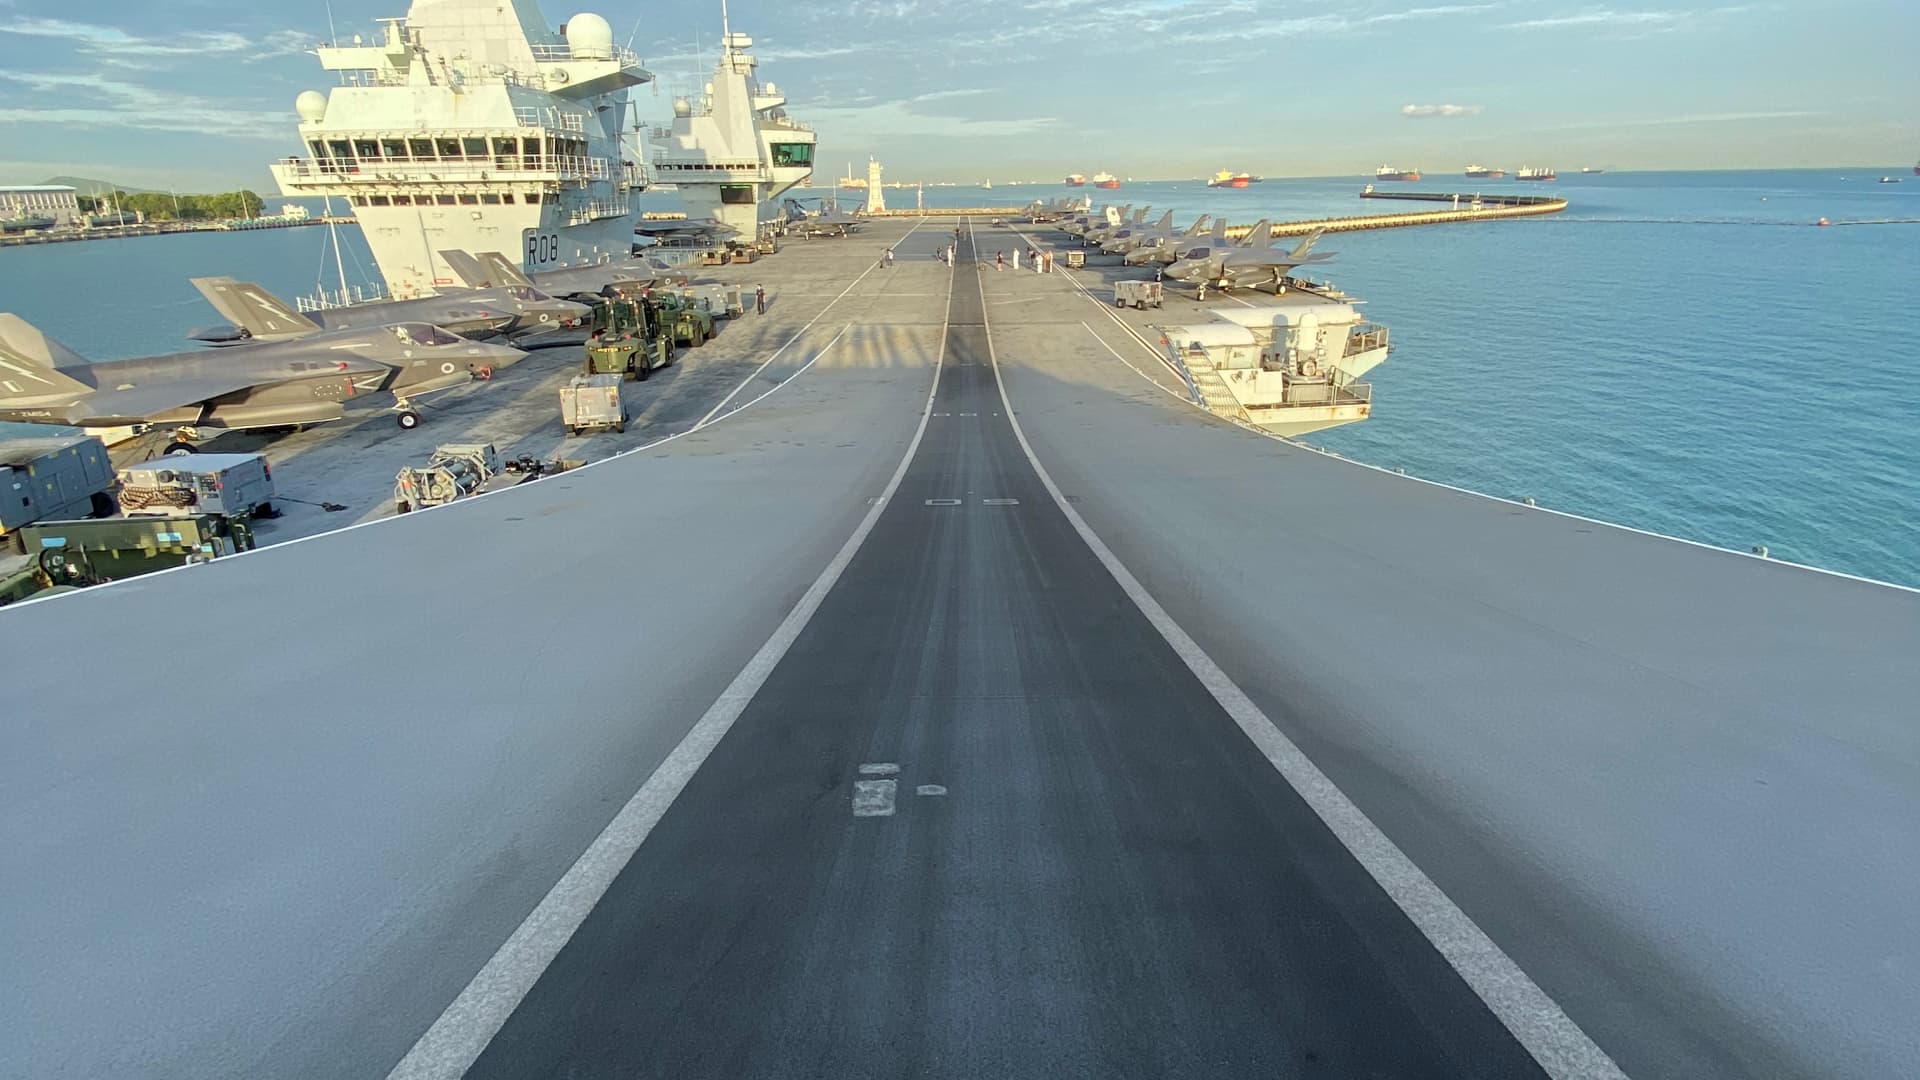 A view of HMS Queen Elizabeth's flight deck from the top of the aircraft carrier's ski ramp.